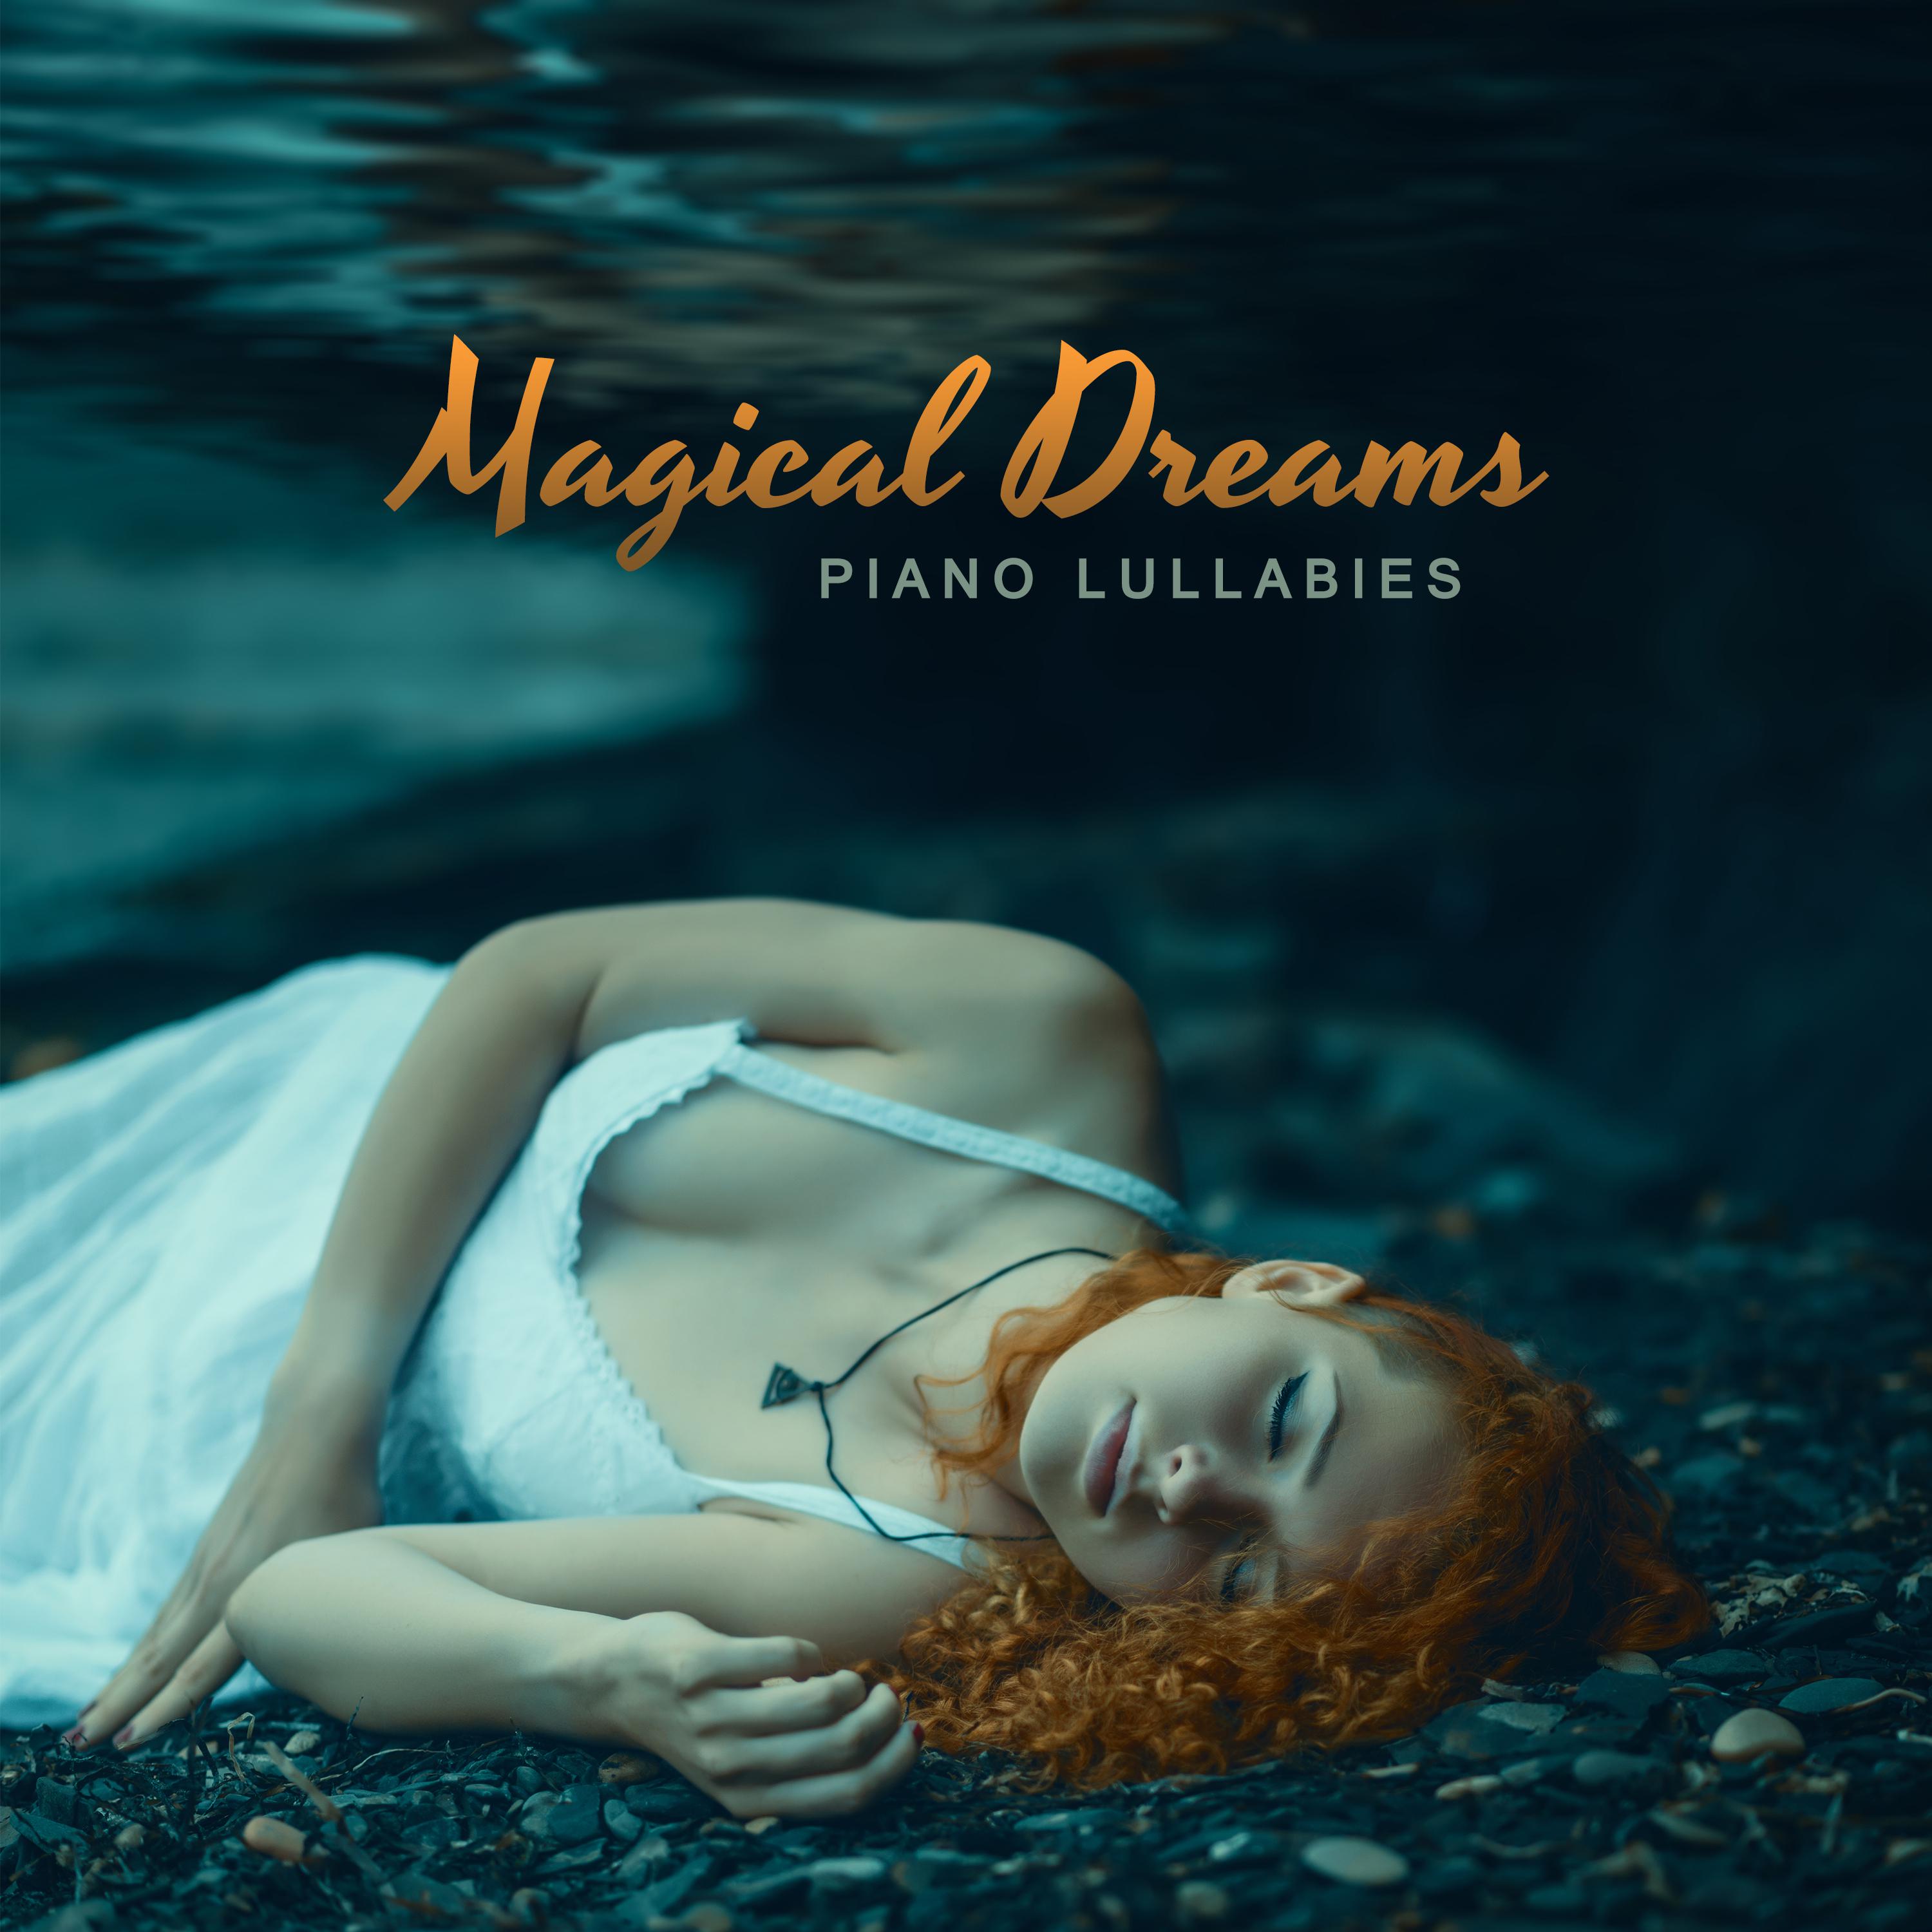 Magical Dreams  Piano Lullabies  Calming and Soothing Songs, Fall Asleep Fast, Deep Relaxation, Peaceful Night, Avoid Nightmares